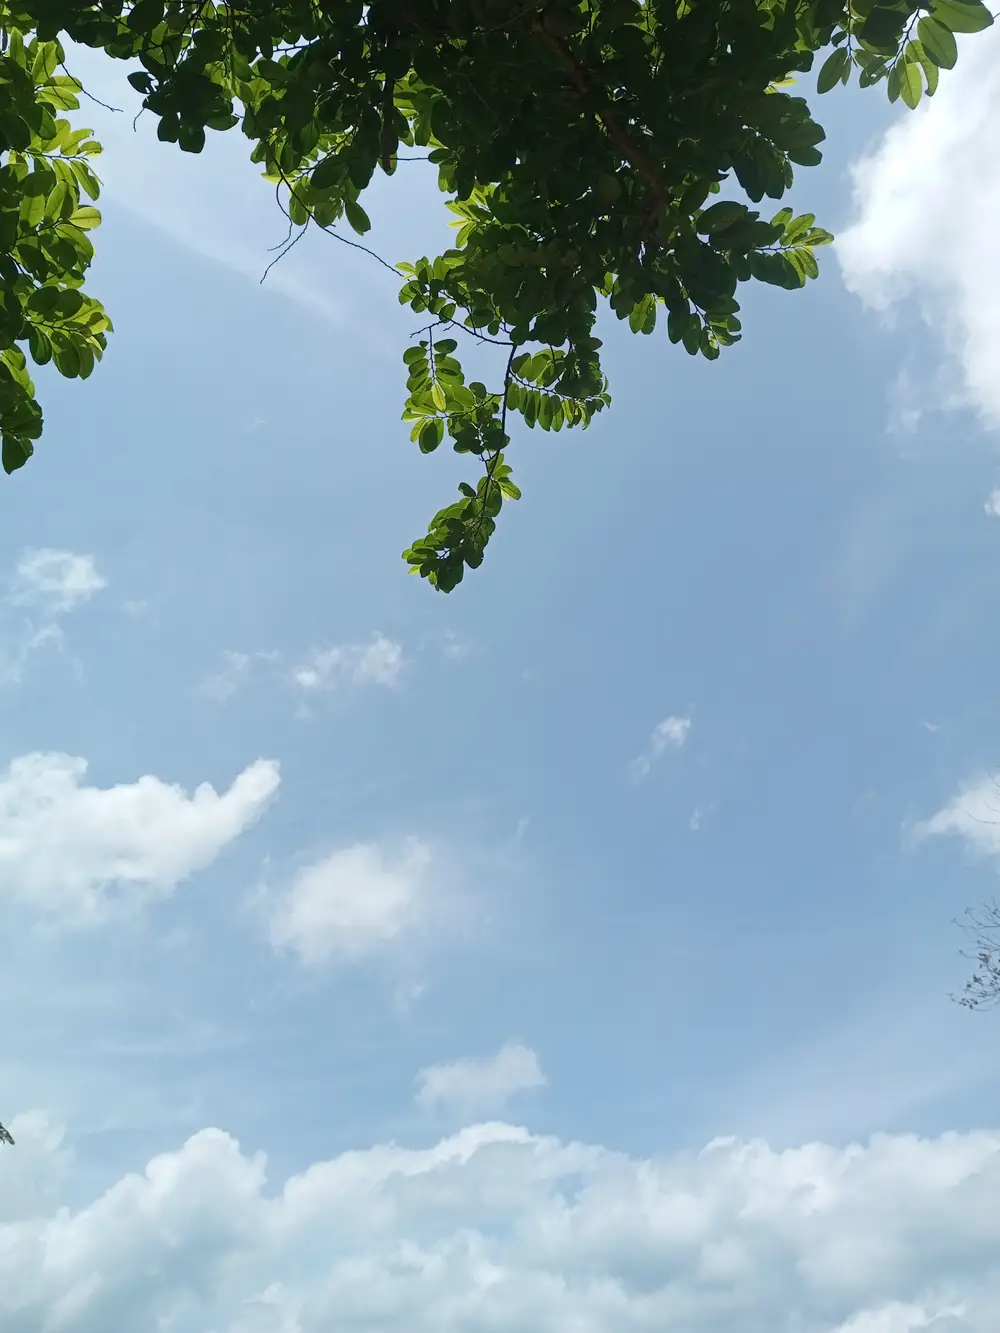 The sky and green leaves